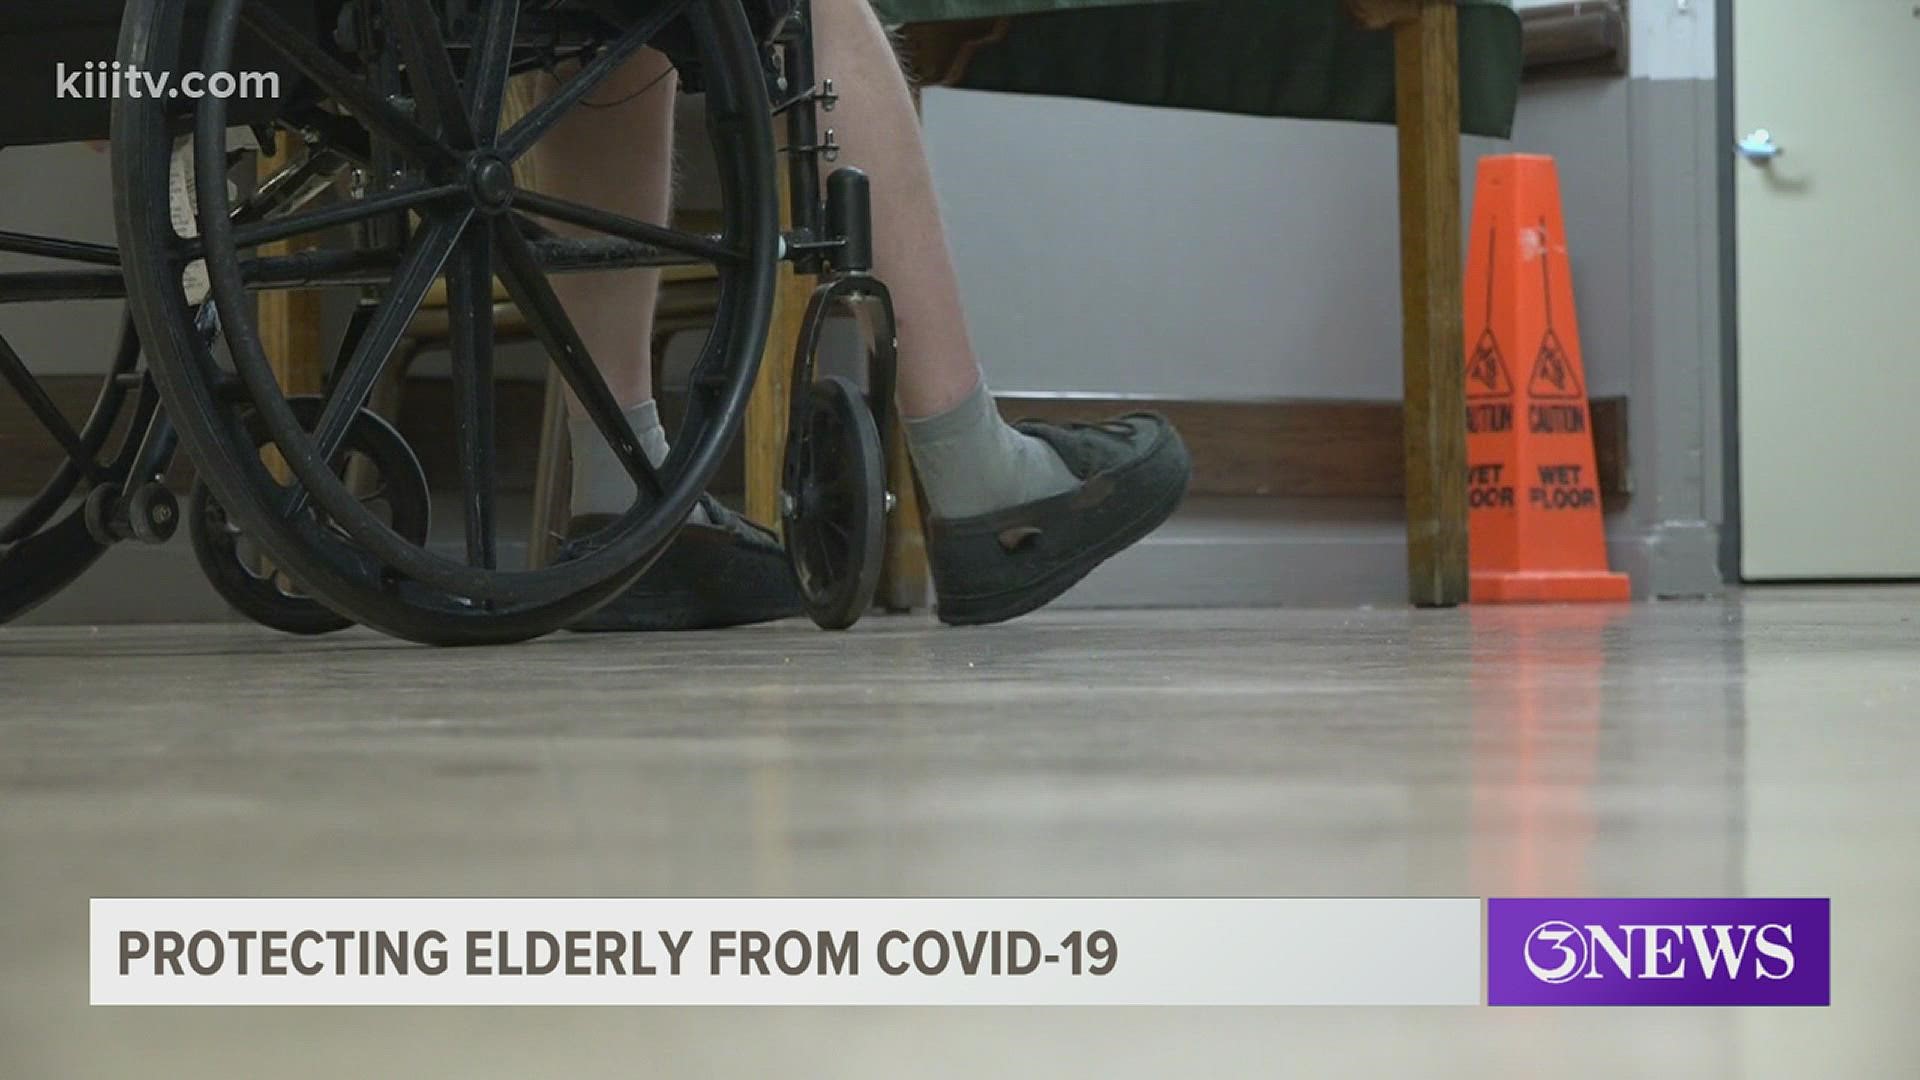 Administrators at once nursing home said they haven't had a positive COVID cases since January.